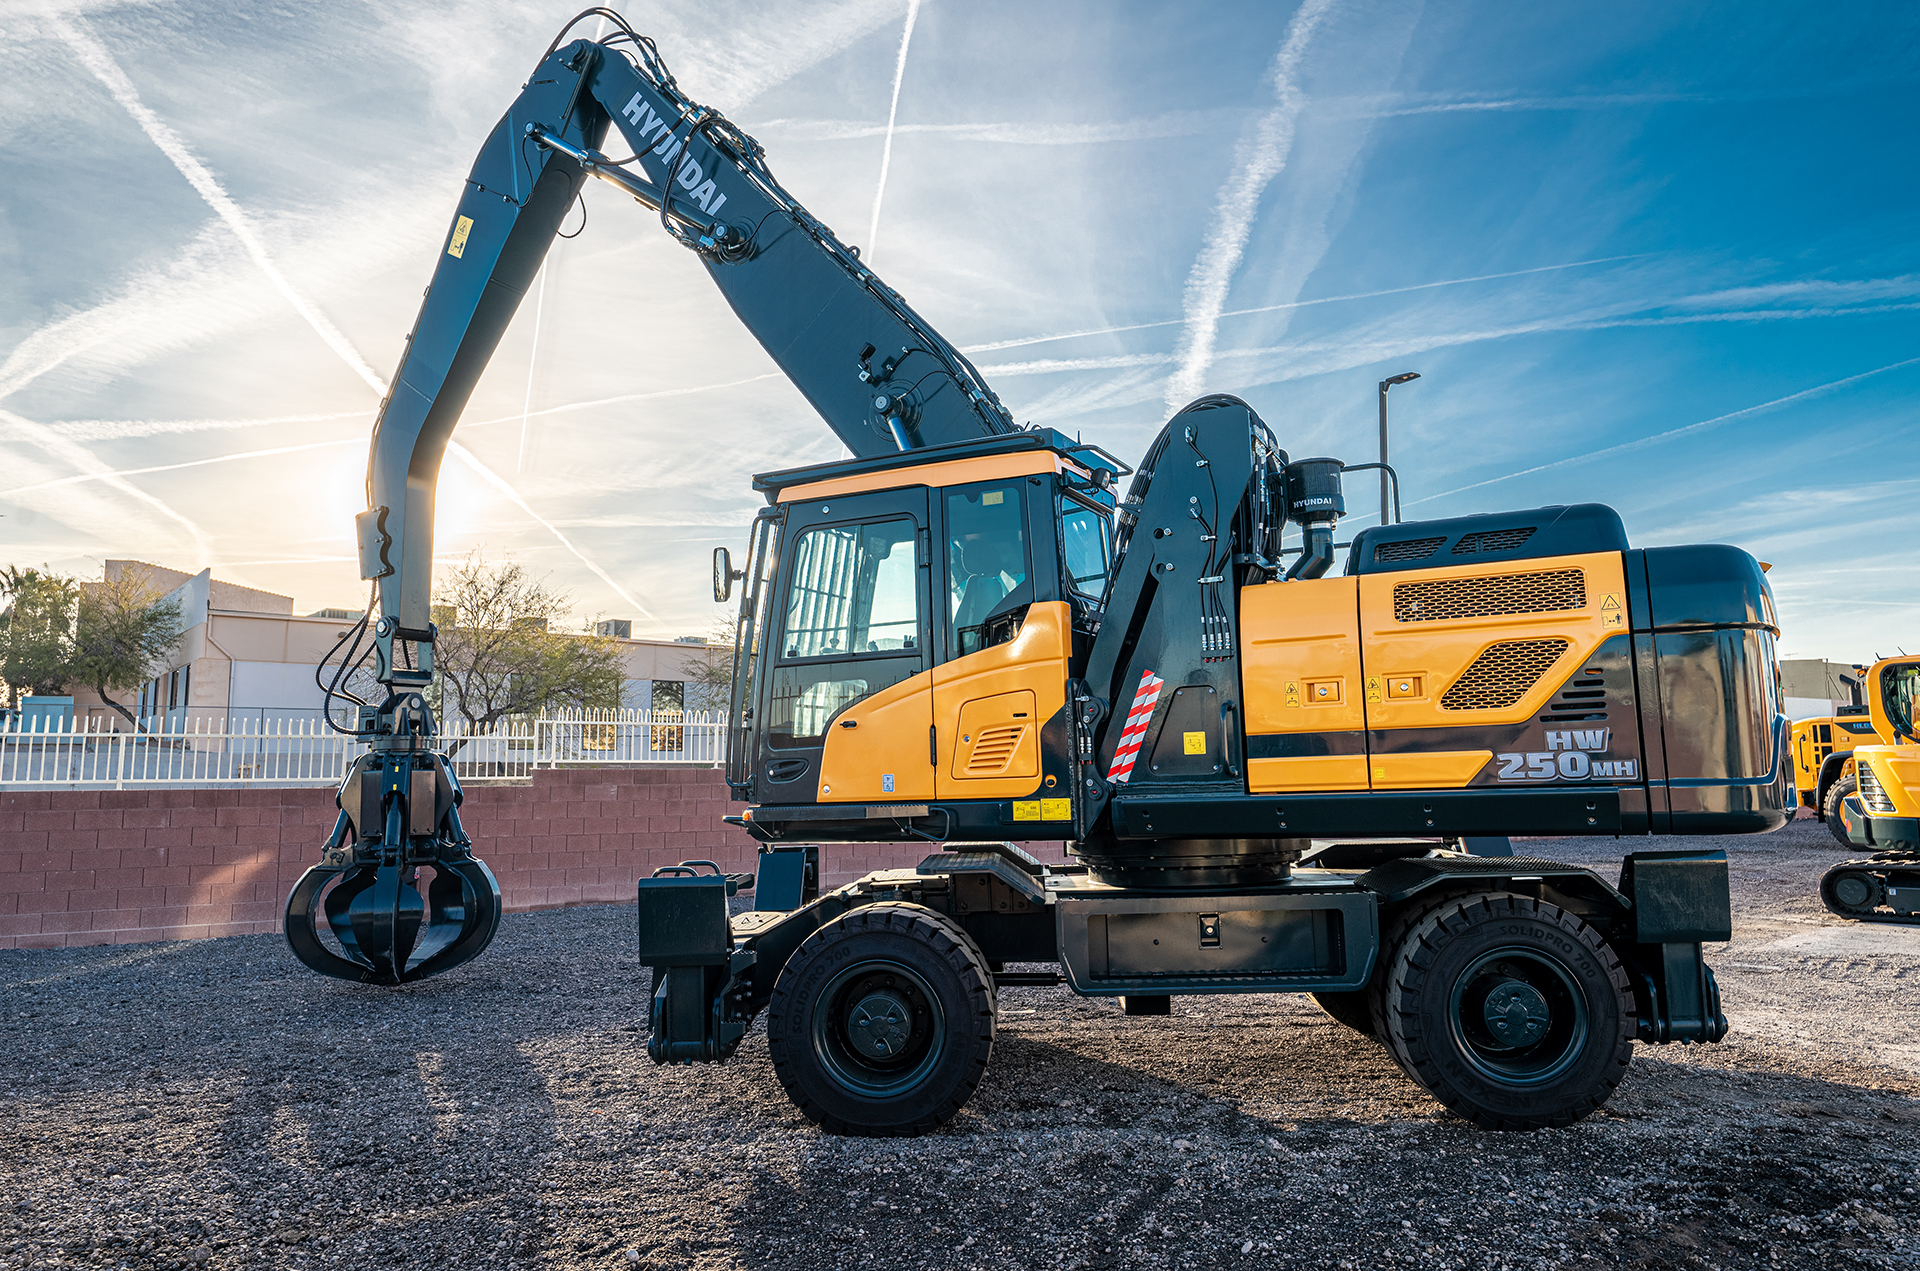 Hyundai Launches New HW250MH Wheeled Material Handler, HX210A Excavator, HX85A Compact Excavator at CONEXPO-CON/AGG 2020